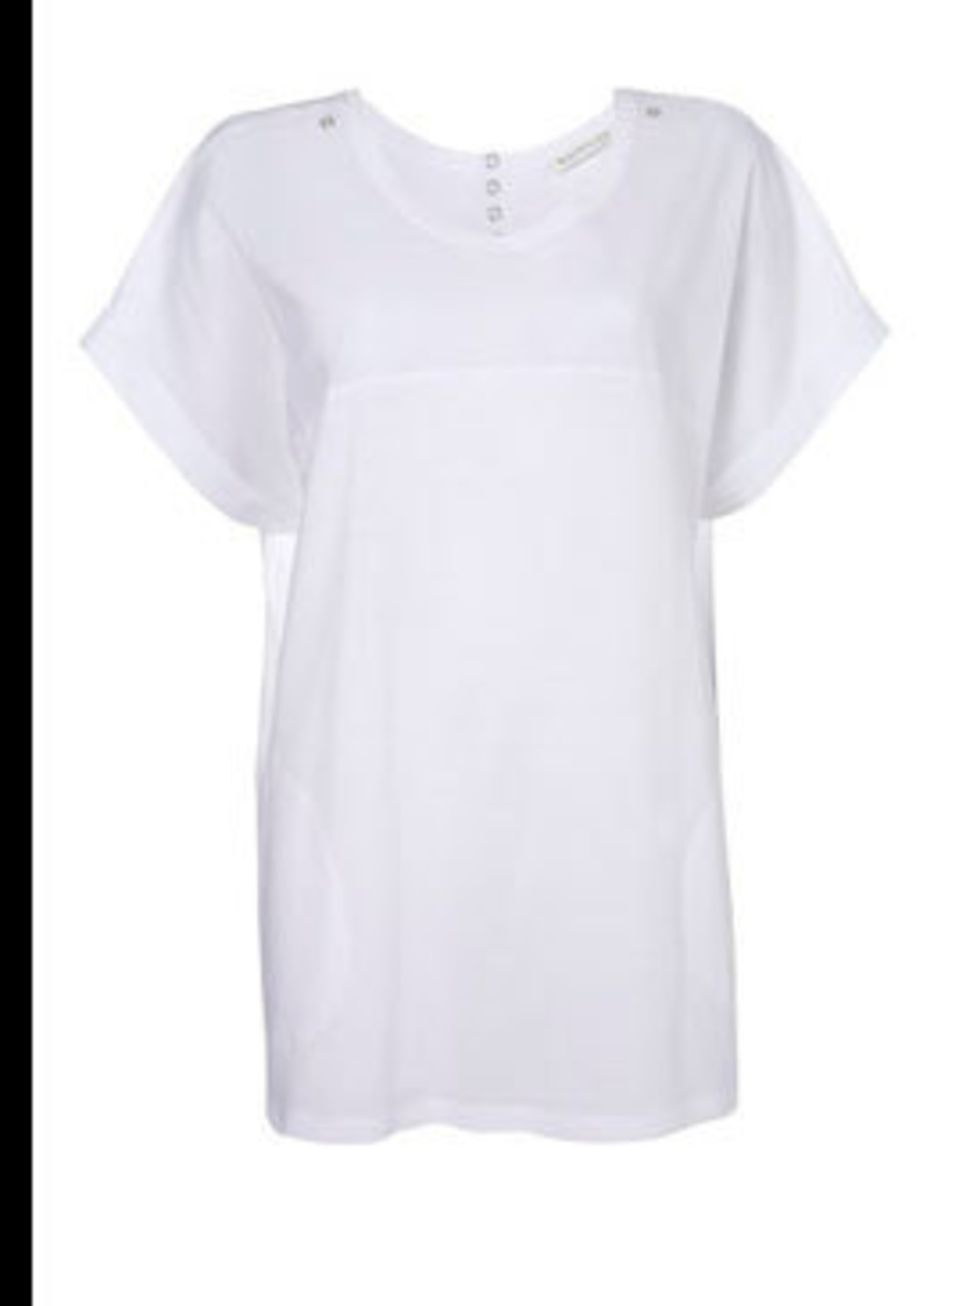 <p>White tee, £45, by <a href="http://www.whistles.co.uk/fcp/product/whistles//Woven-Yoke-Oversize-Tee/903000053480">Whistles</a></p>